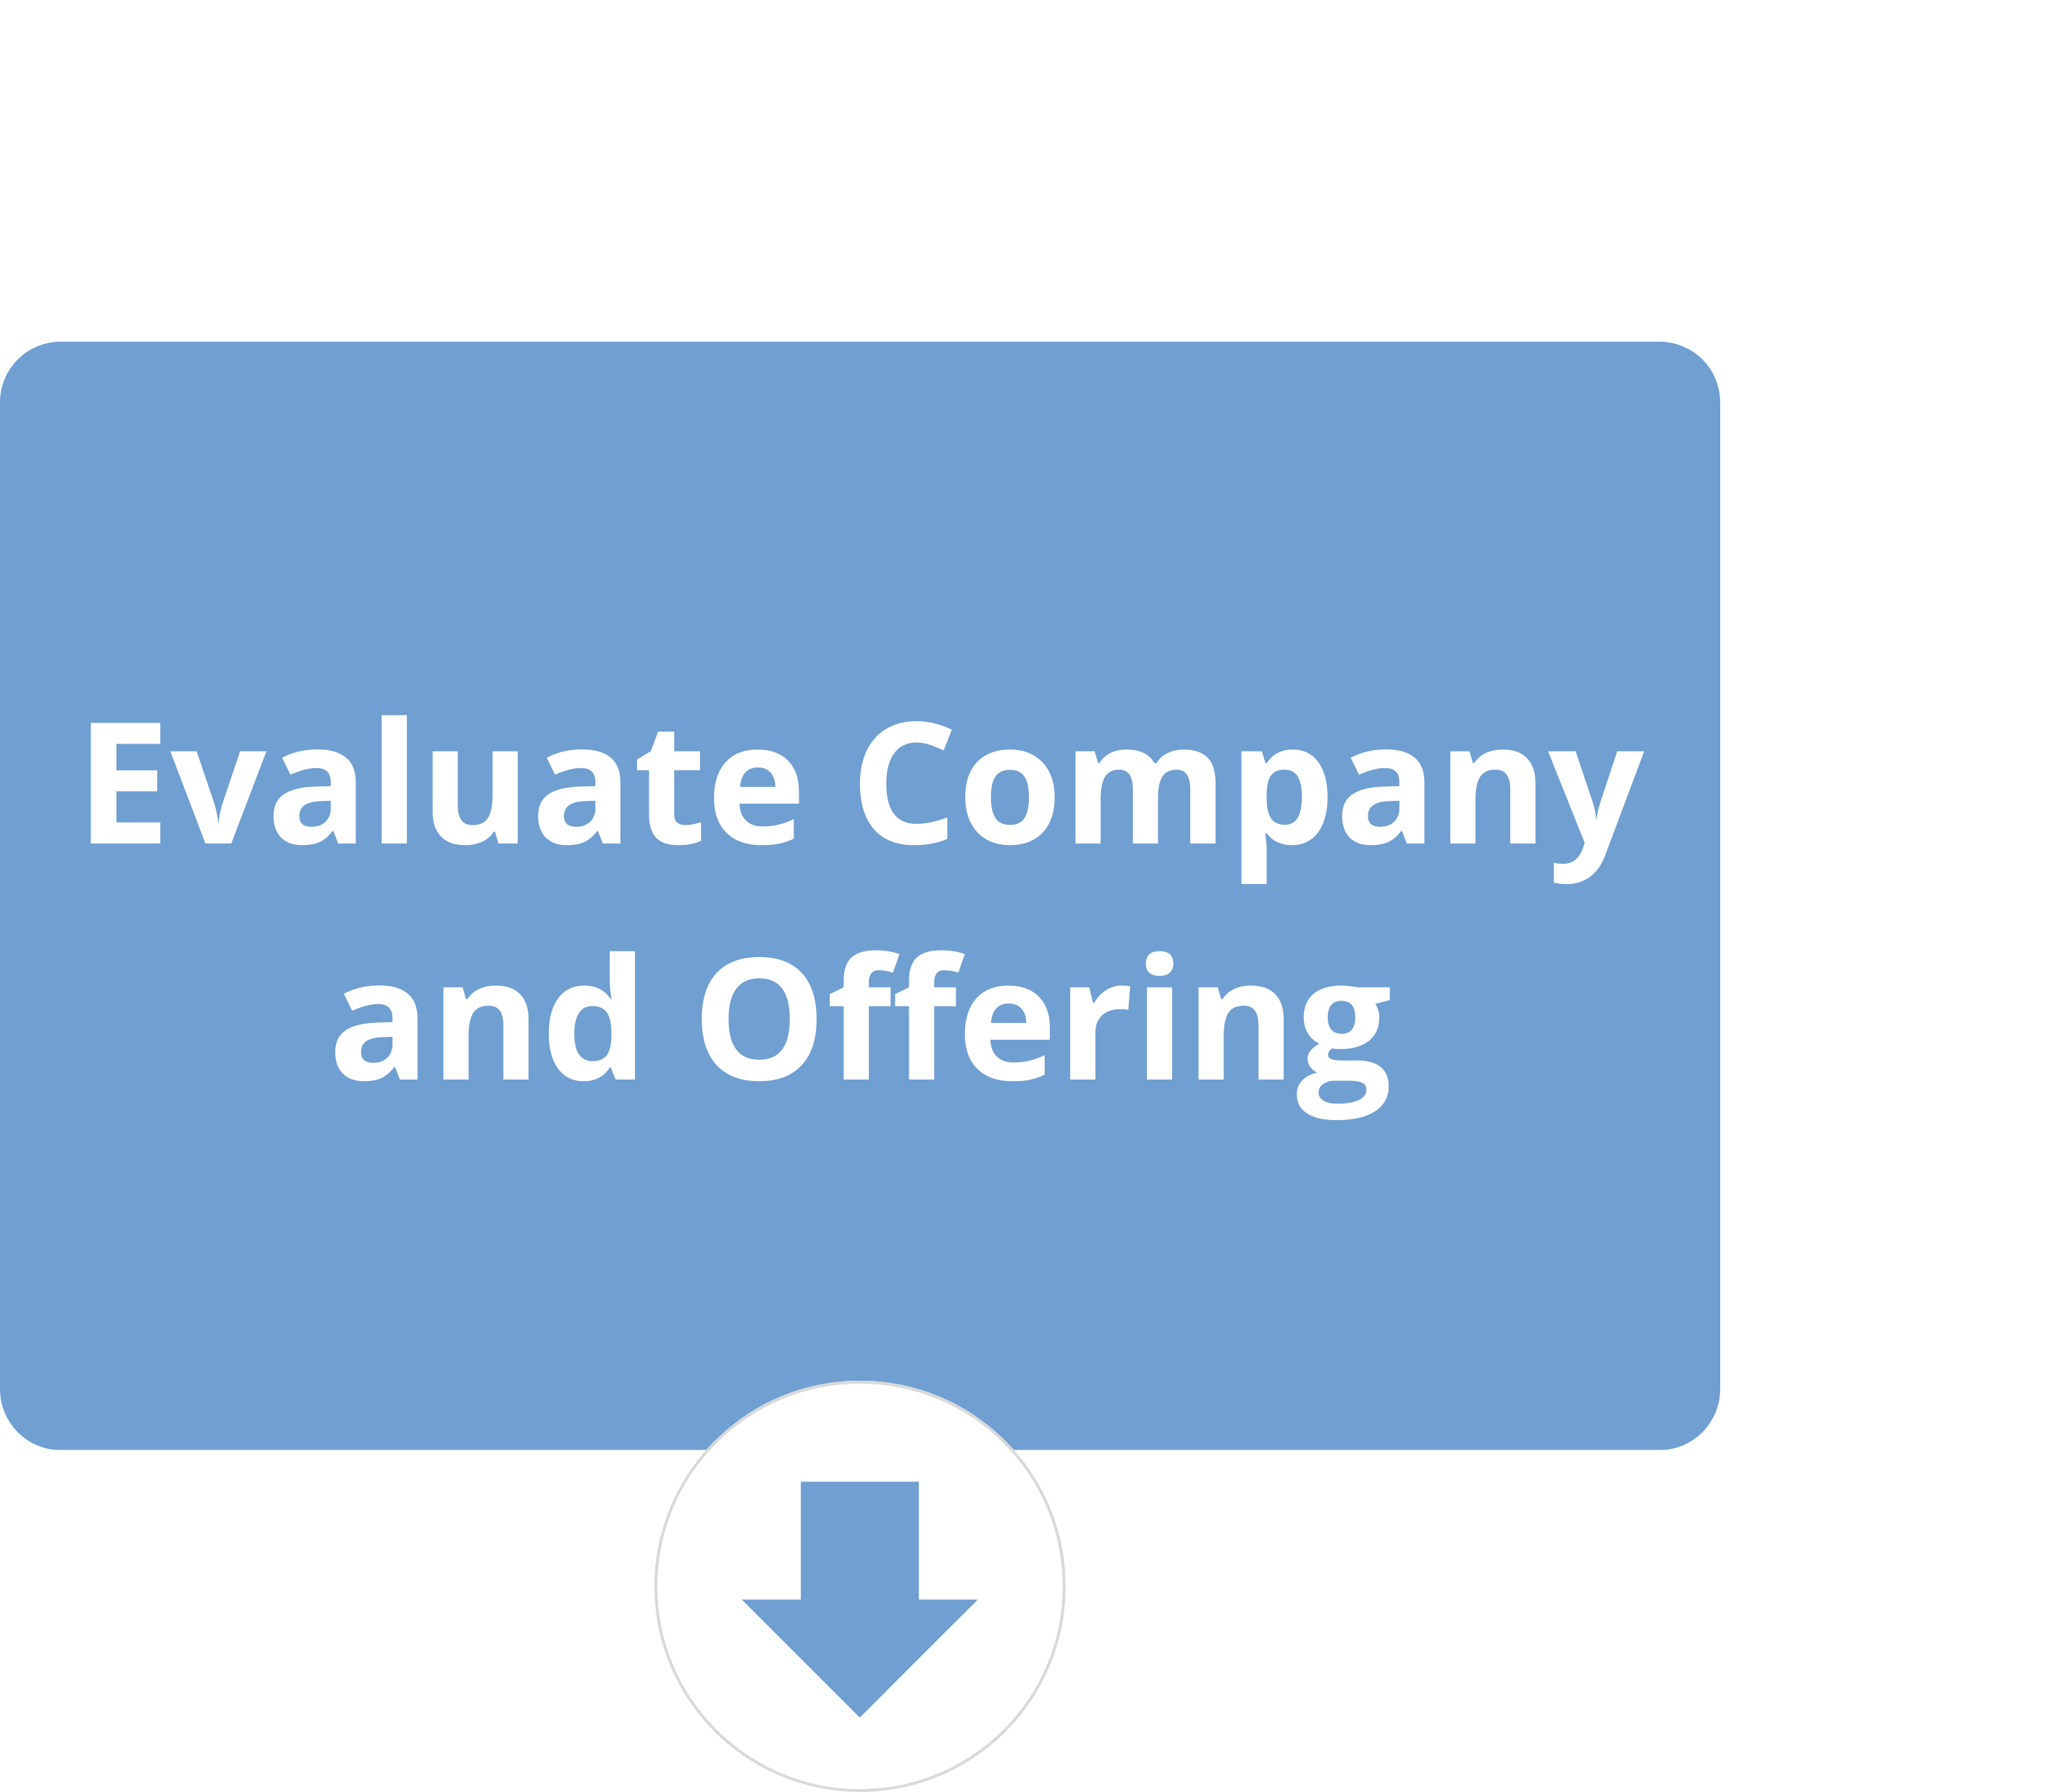 Evaluate Company and Offering